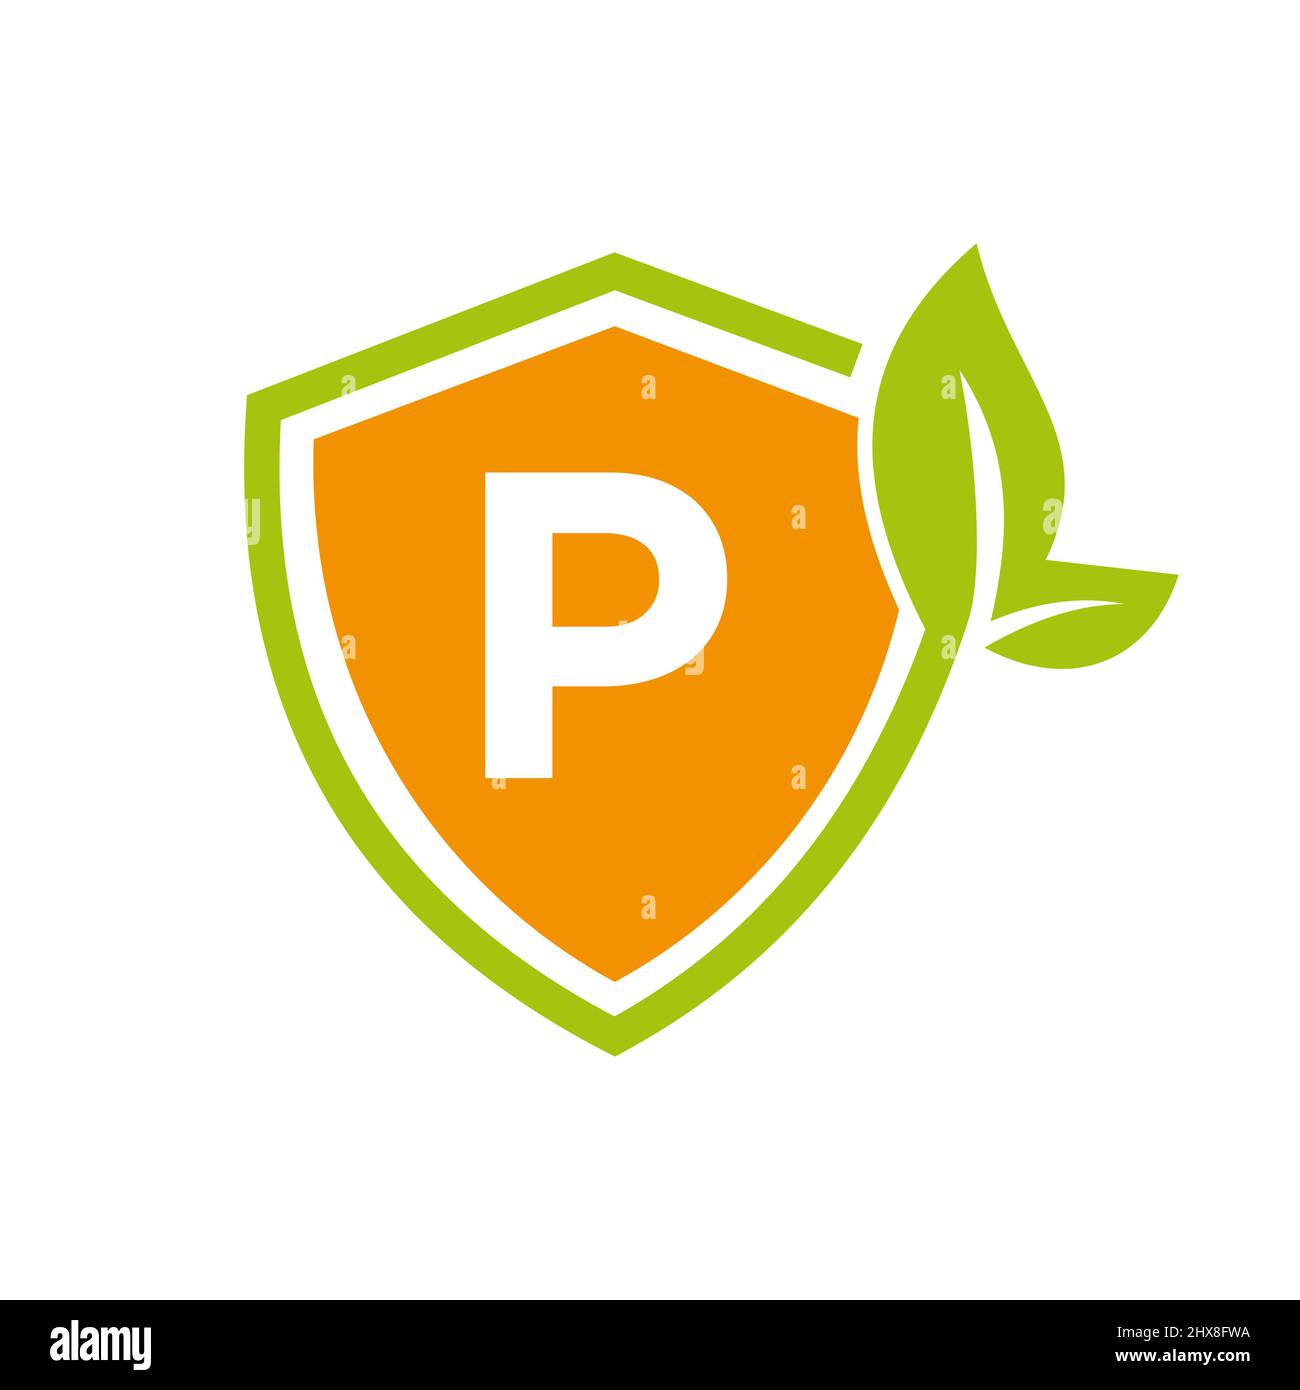 Eco Leaf Agriculture Logo On Letter P Vector Template. Eco Sign, Agronomy, Wheat Farm, Rural Country Farming, Natural Harvest Concept Stock Vector